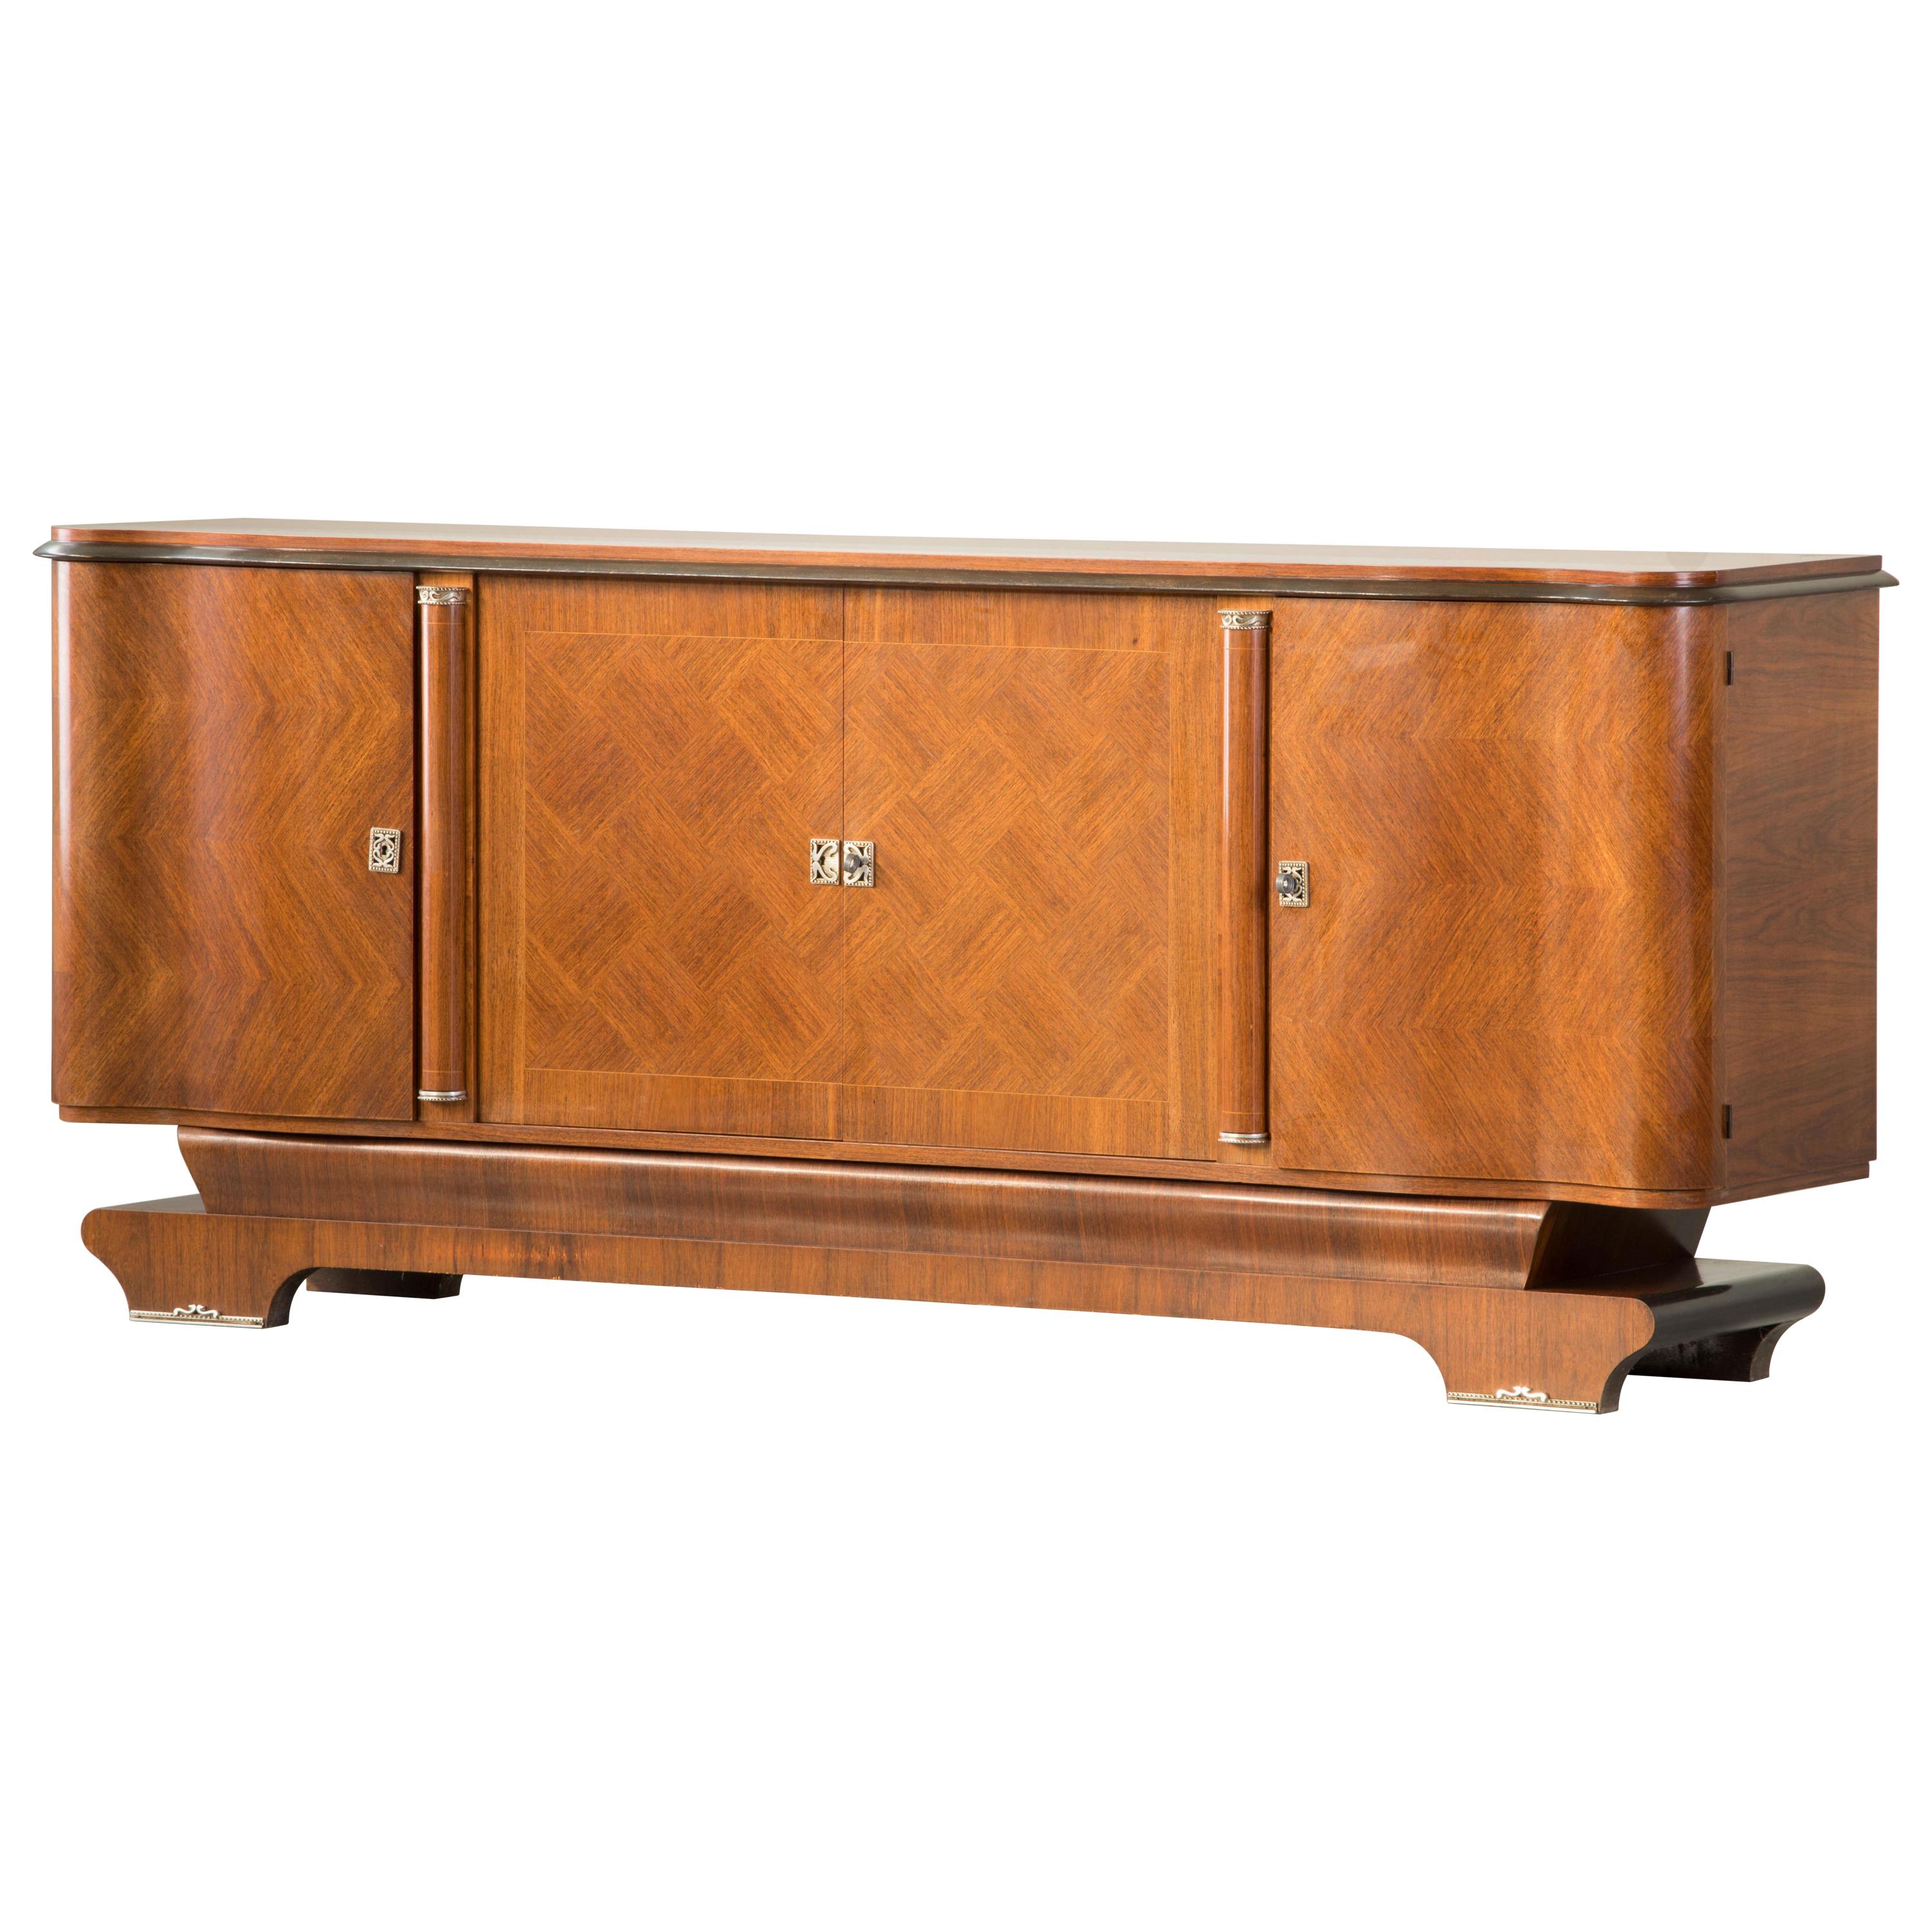 A handsome marquetry mahogany sideboard in the style of Jules Leleu, early 20th century.
This sideboard features three compartments with shelves with a drawer in the central one. The interior is made of Sycamore. This is a very nice piece, in good